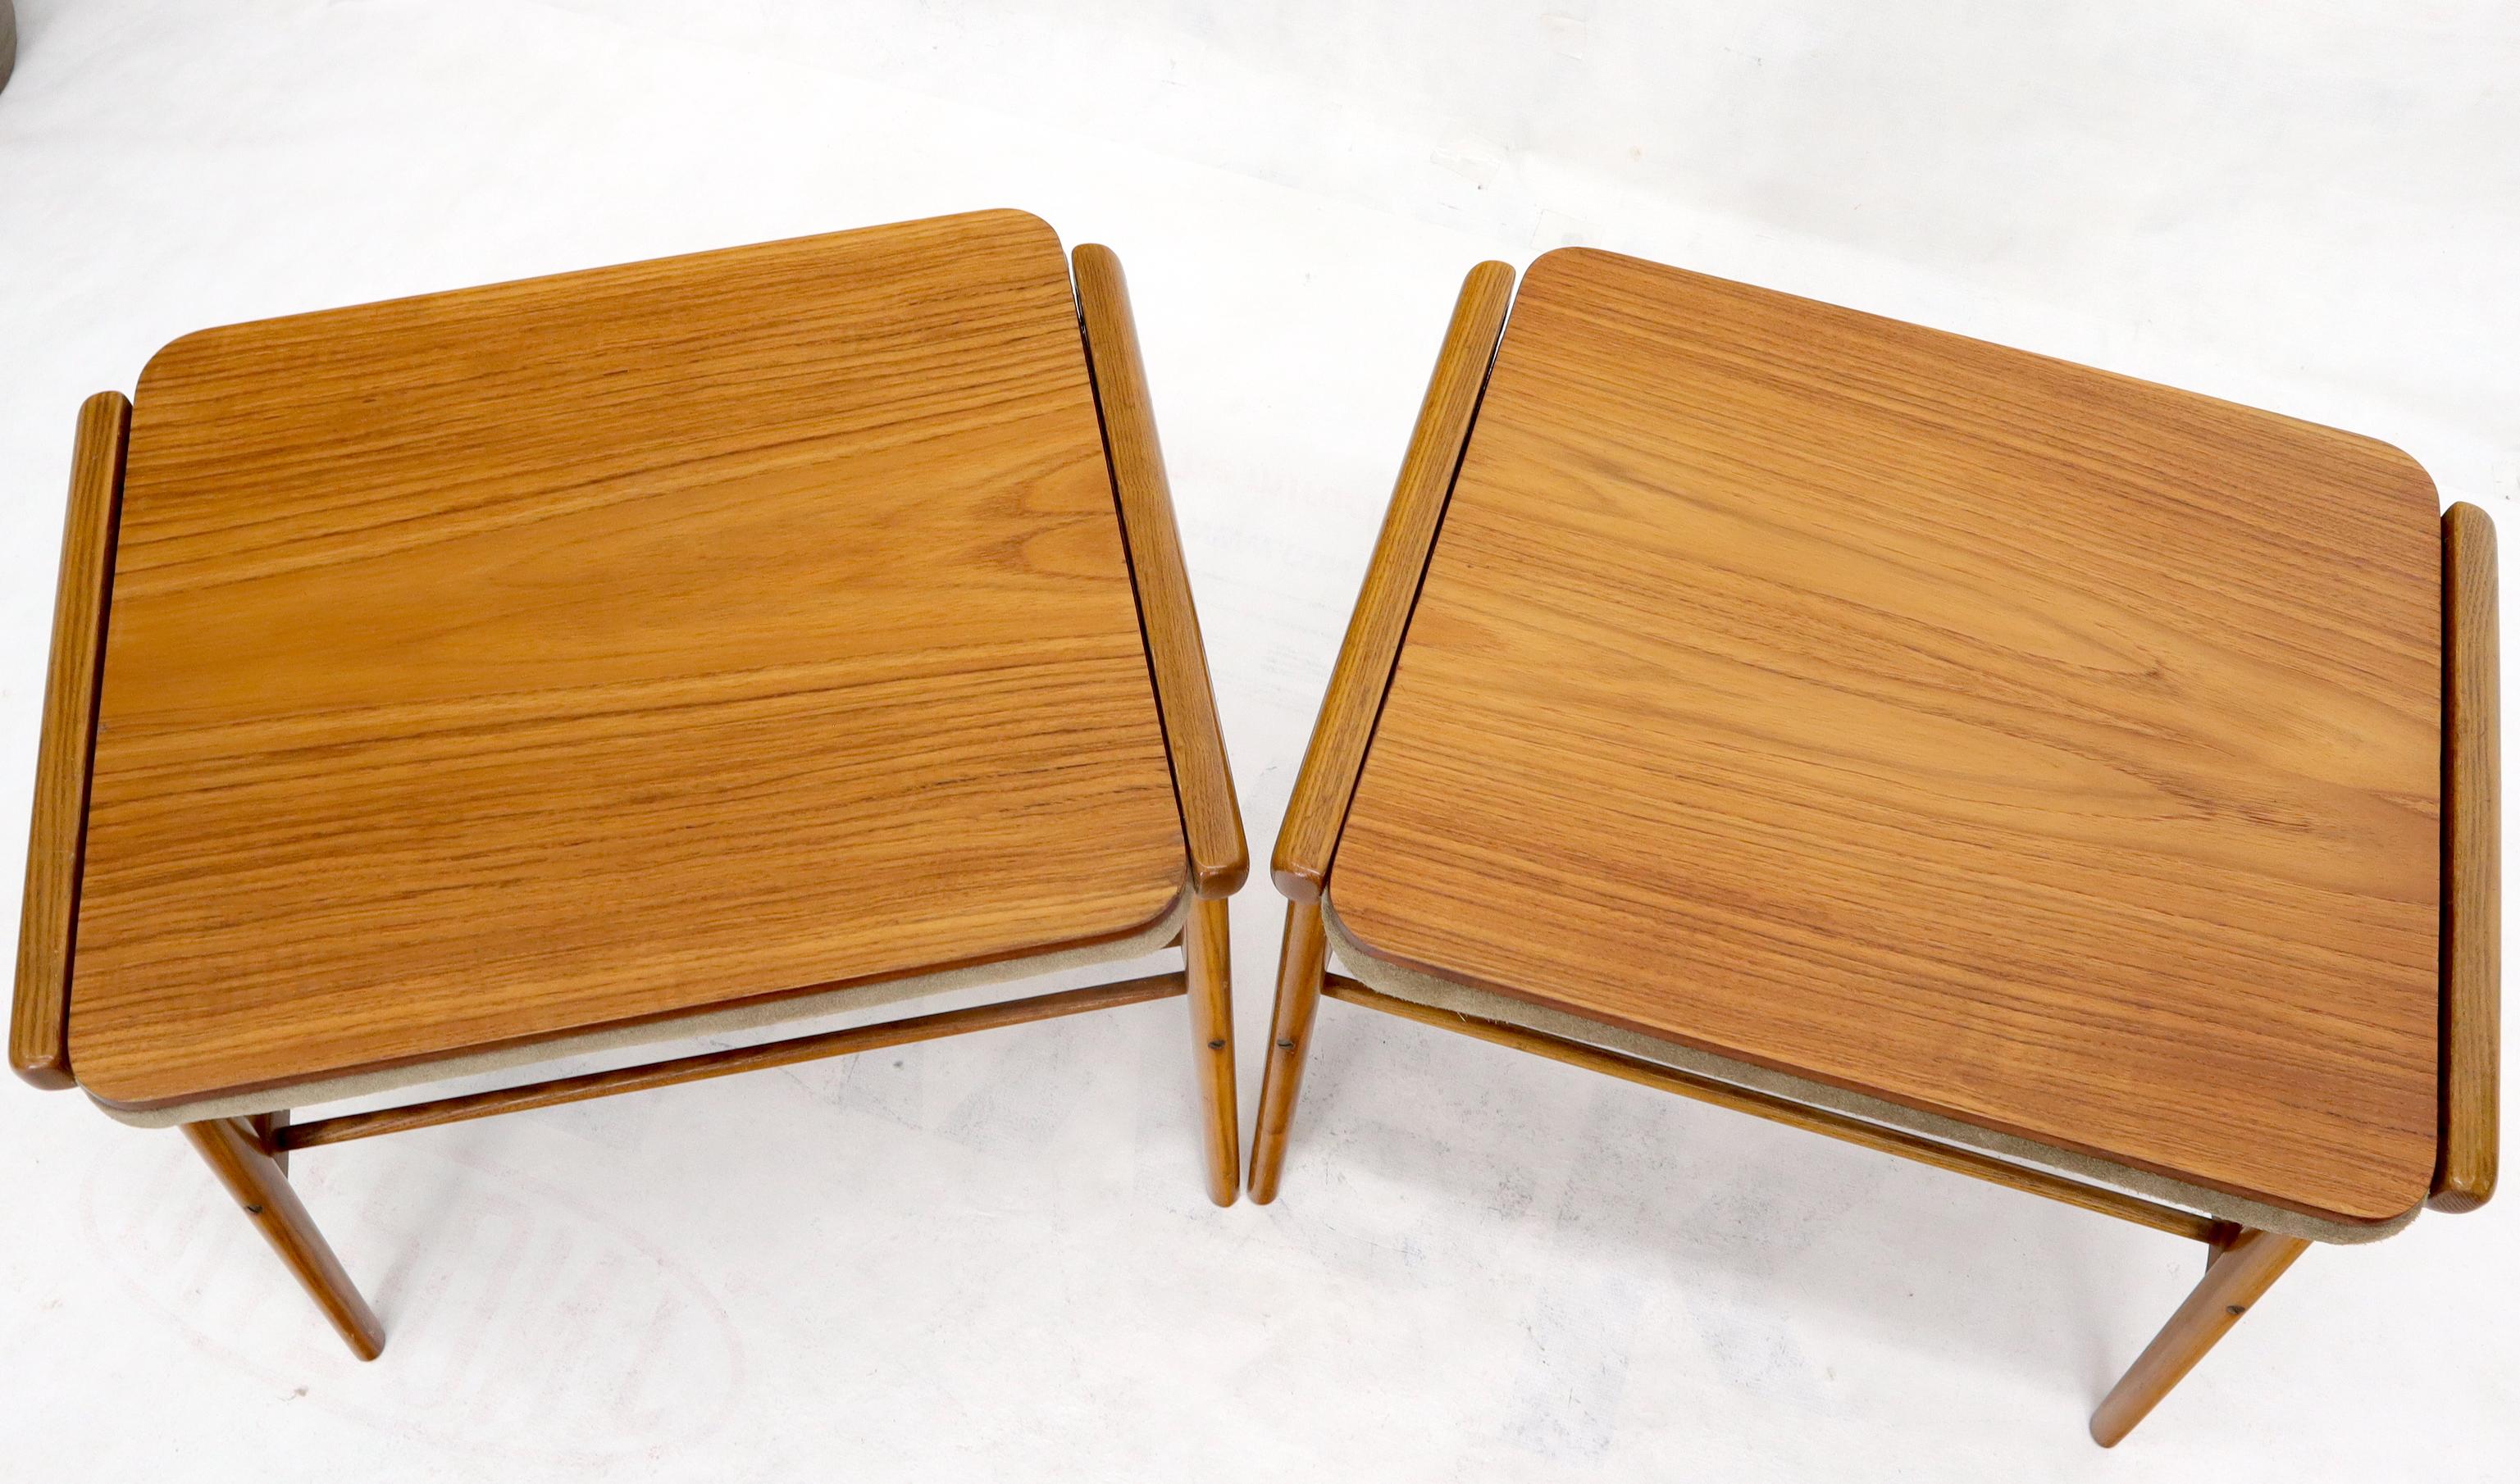 Pair of Danish Teak Mid-Century Modern Flip Top Tables Suede Benches For Sale 2